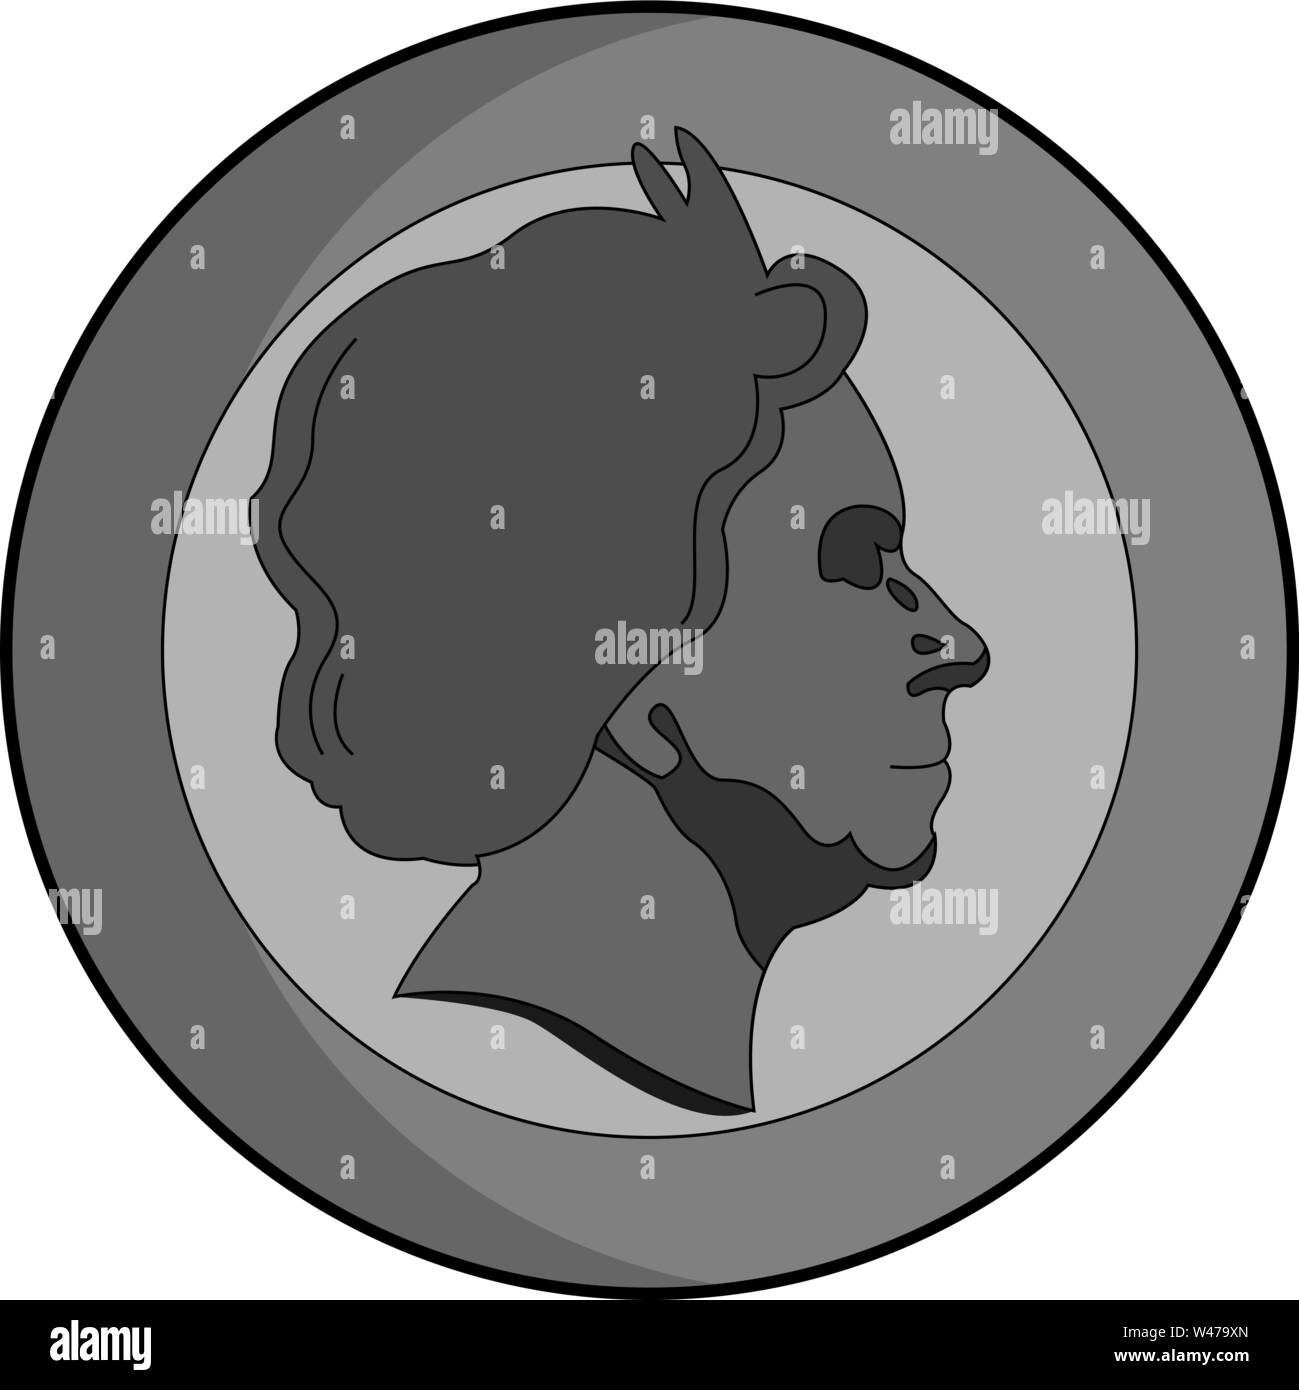 Silver coin, illustration, vector on white background. Stock Vector